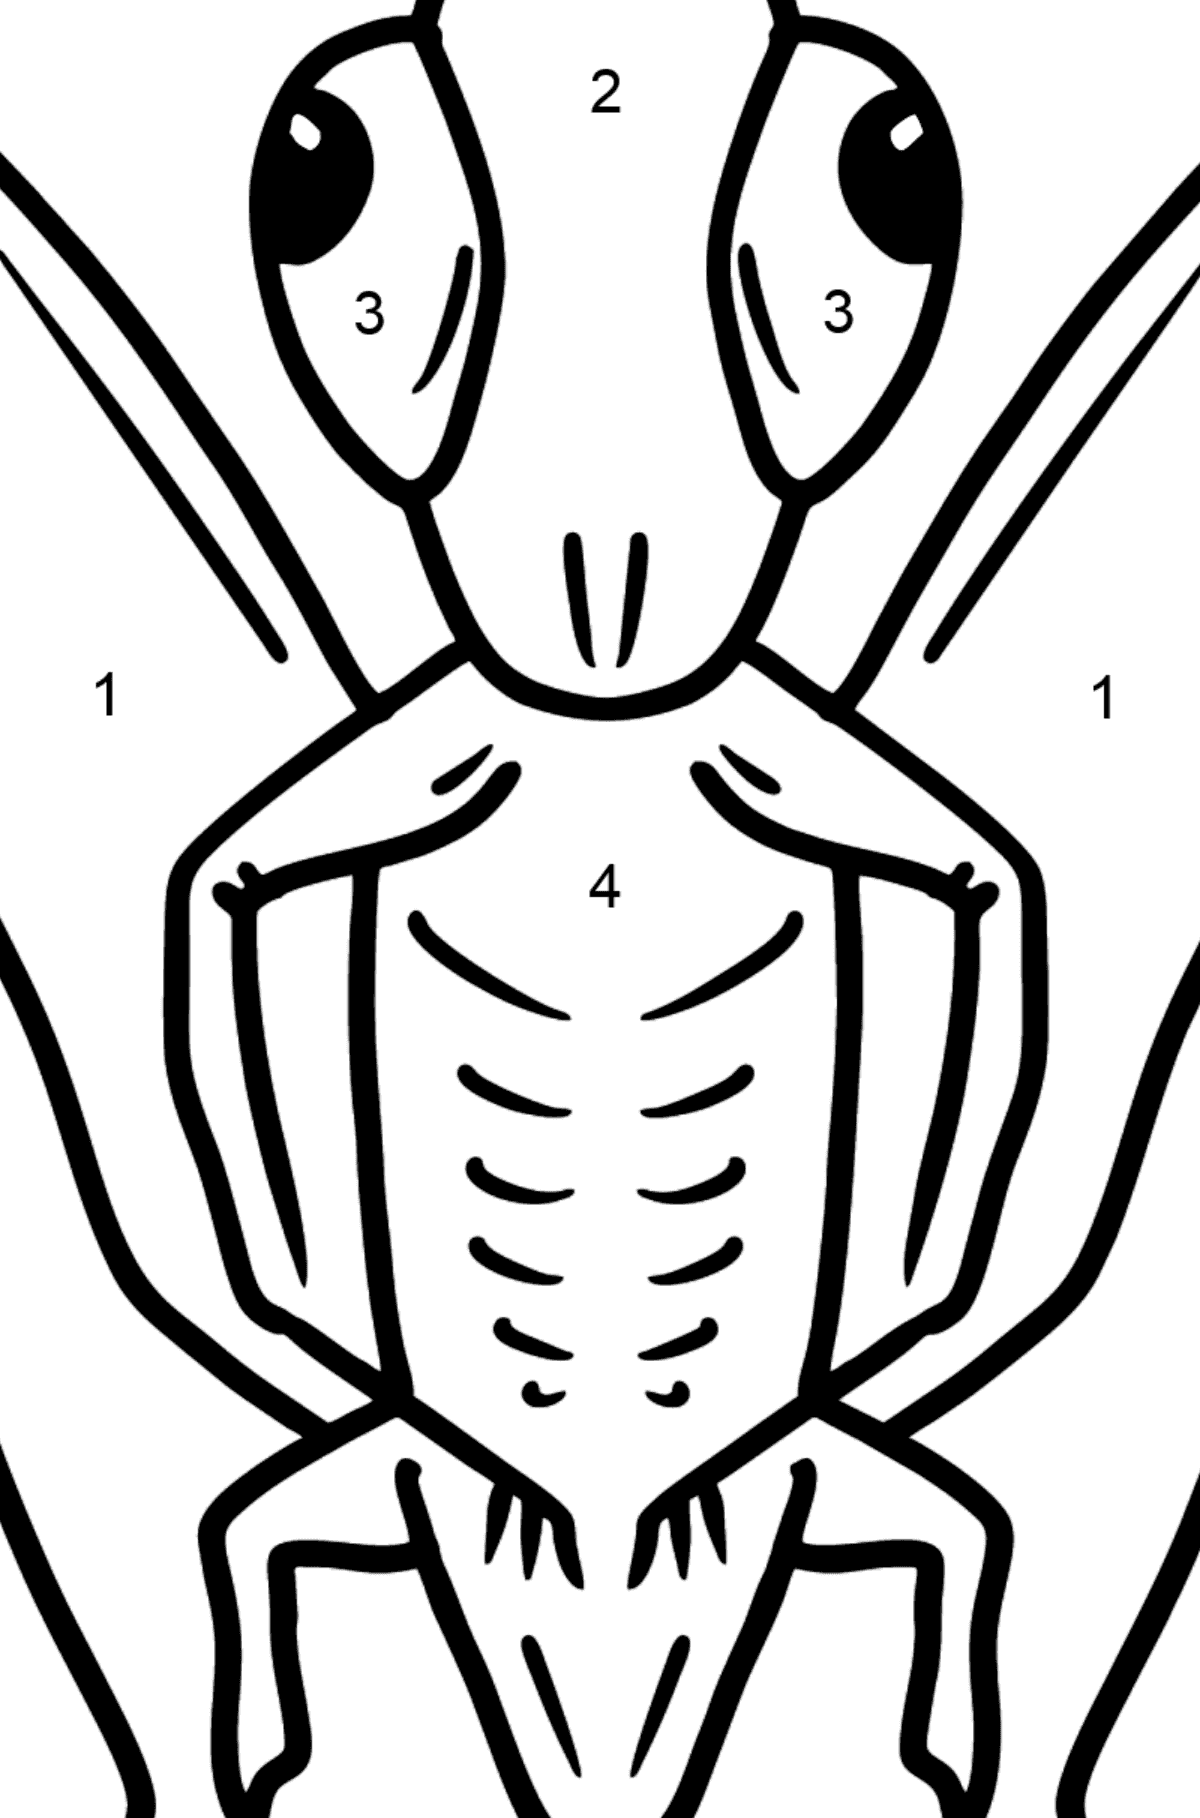 Grasshopper coloring page - Coloring by Numbers for Kids